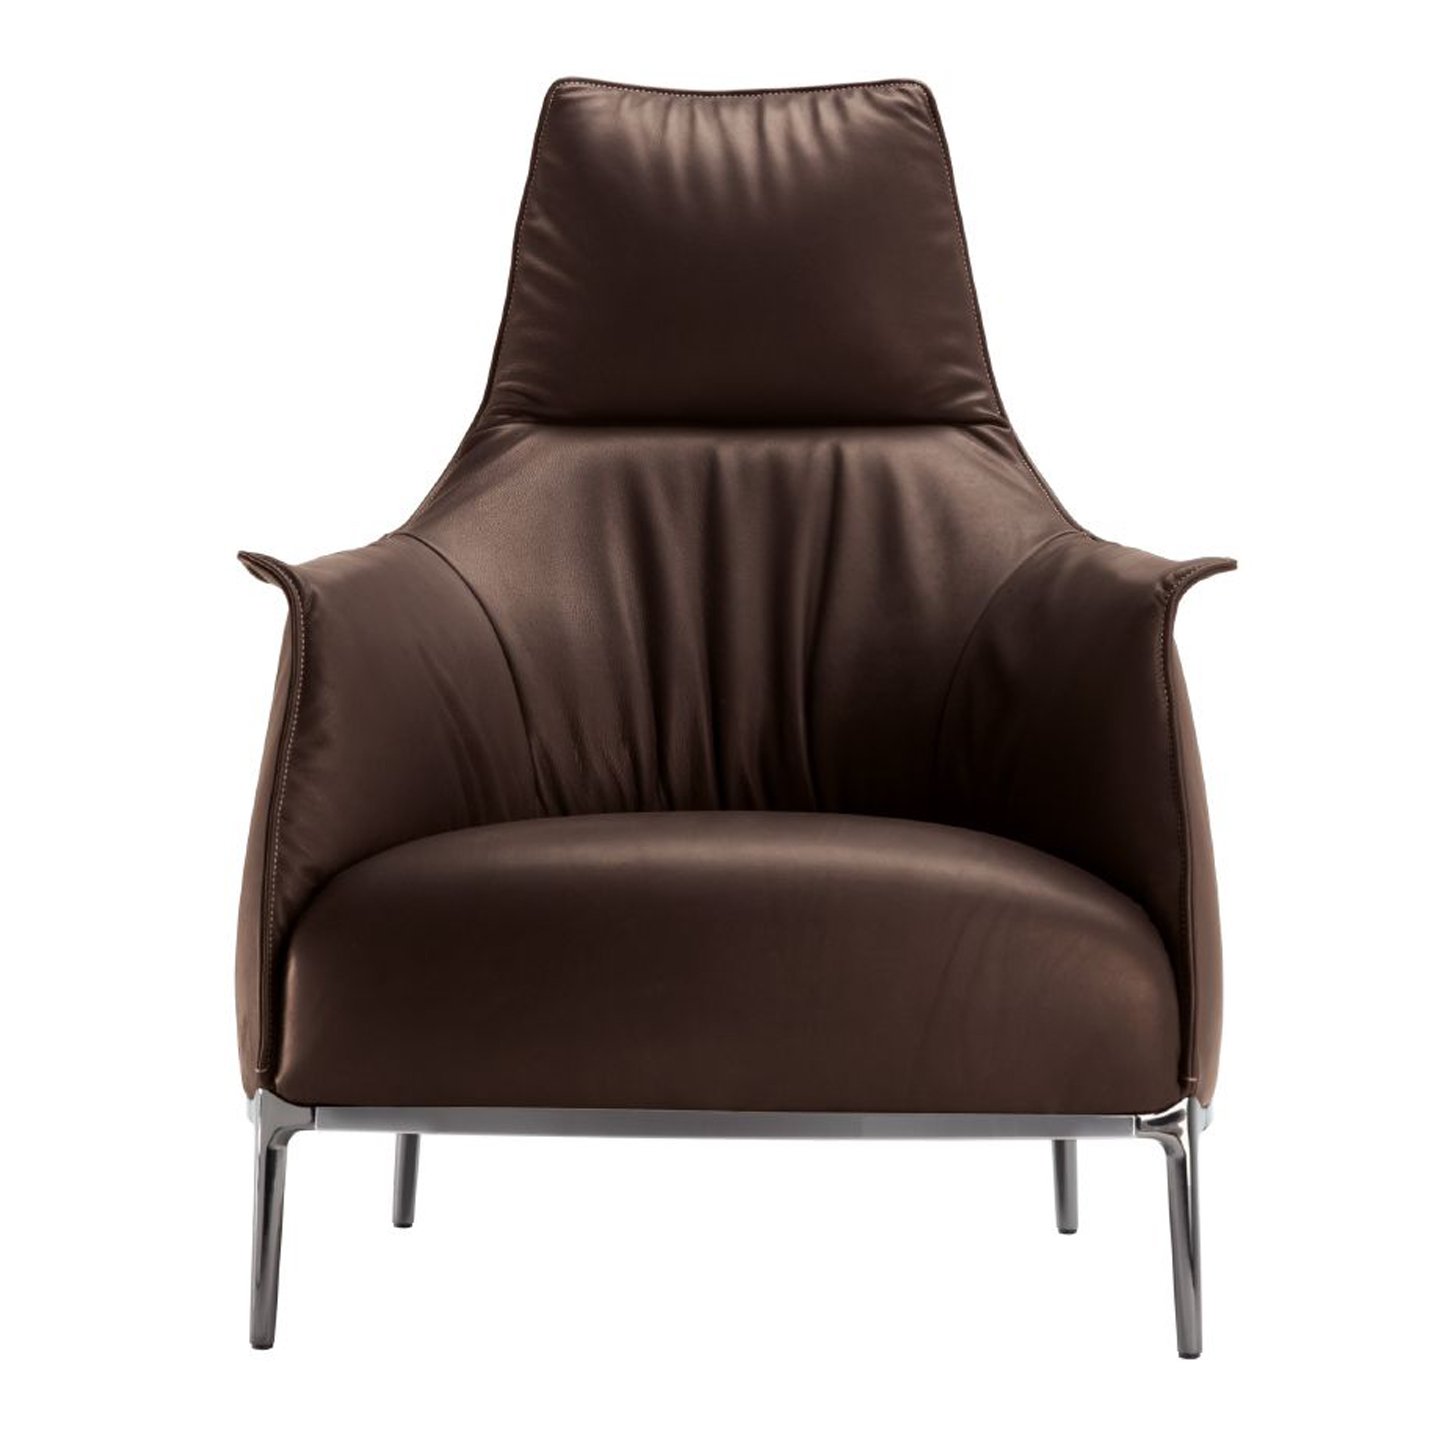 Haworth High Back Archibald lounge chair in brown leather